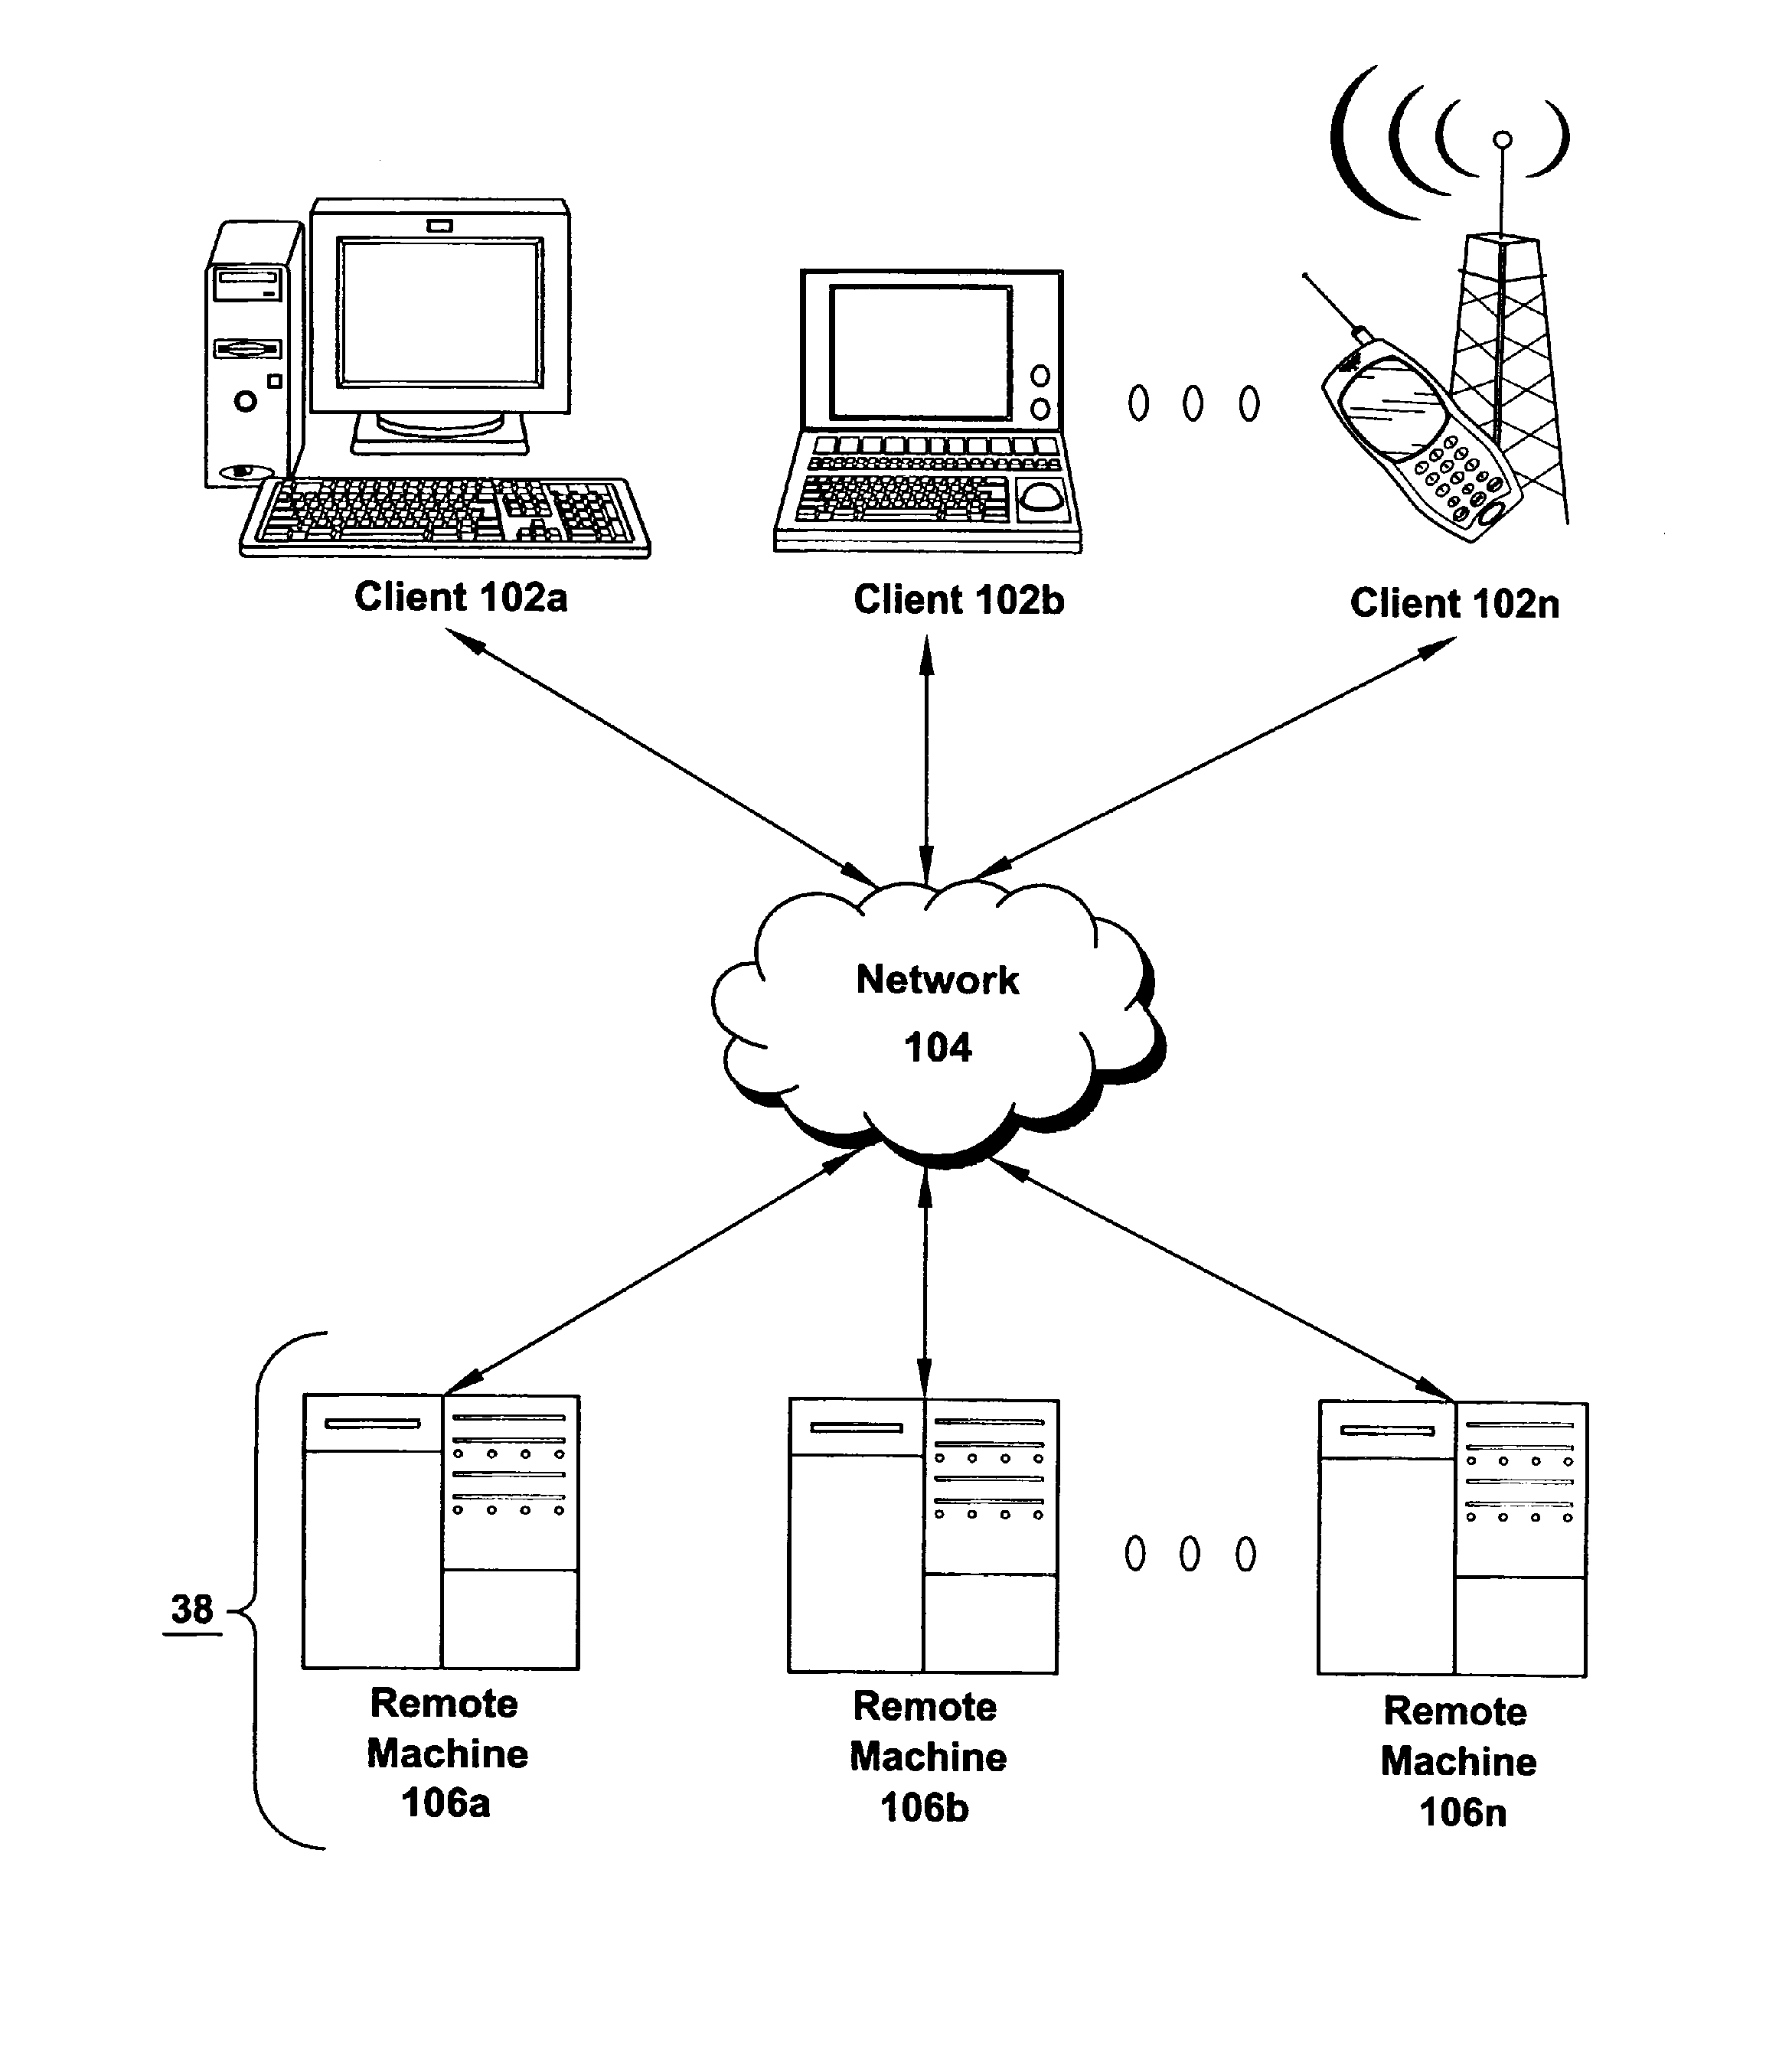 Methods and Systems for Using External Display Devices With a Mobile Computing Device